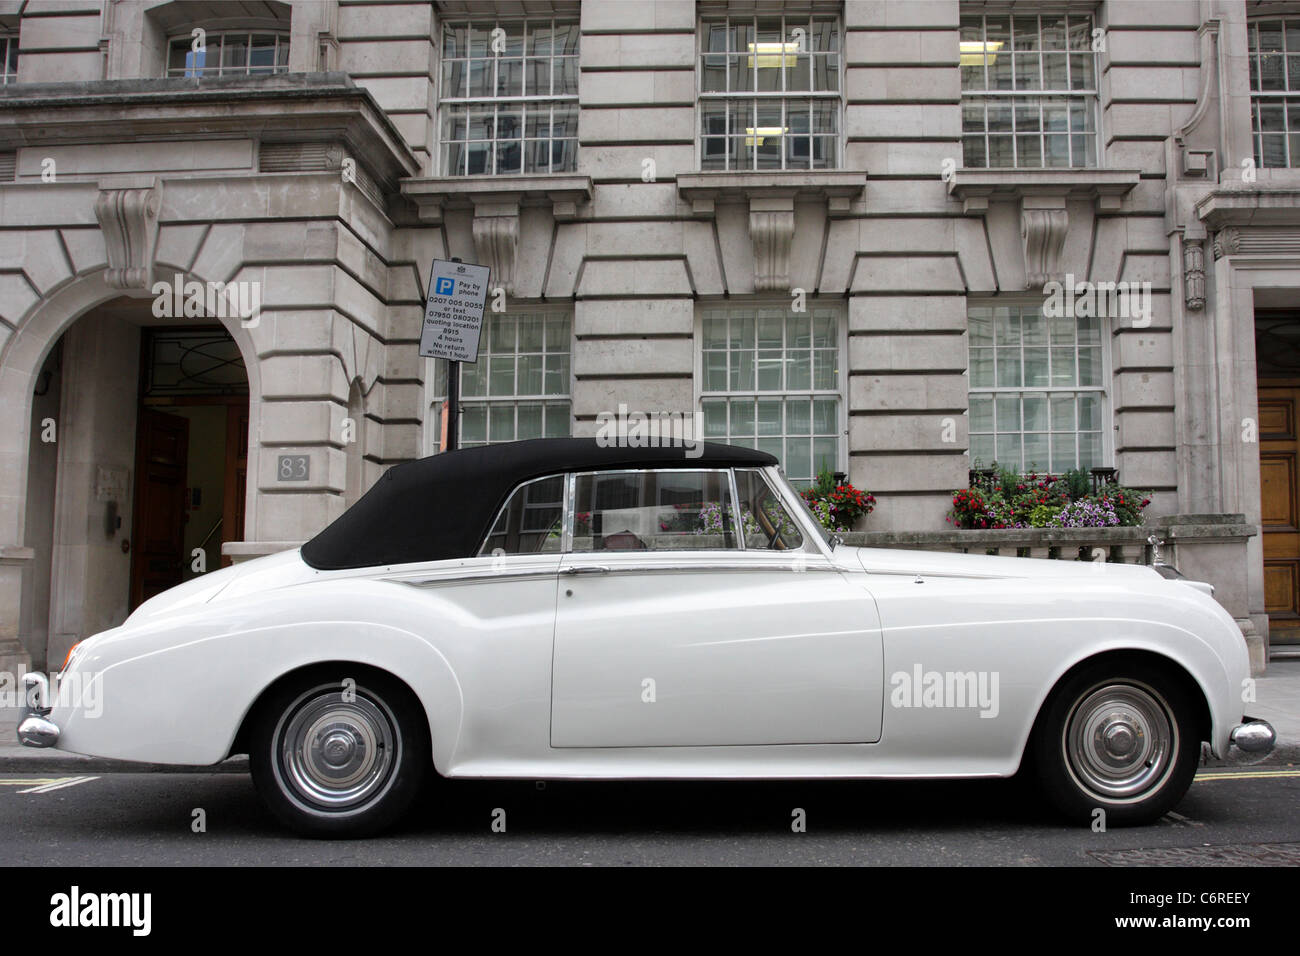 Delightful Rolls Royce Silver Cloud 11 convertible, viewed here in Pall Mall, London. Stock Photo